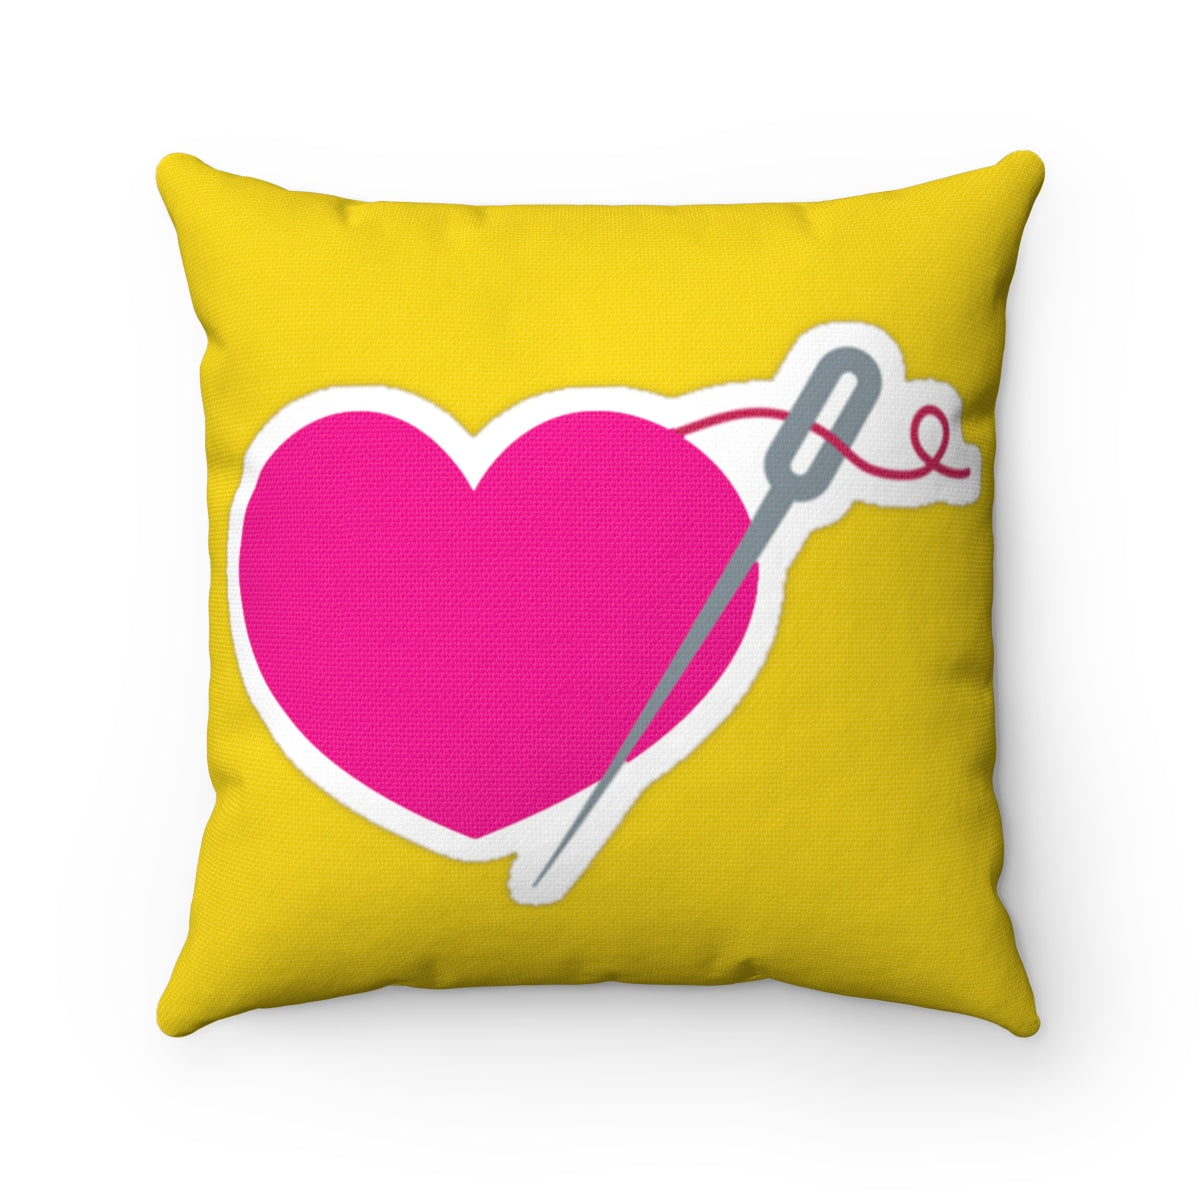 HEART AND NEEDLE Square Pillow Case (gold)